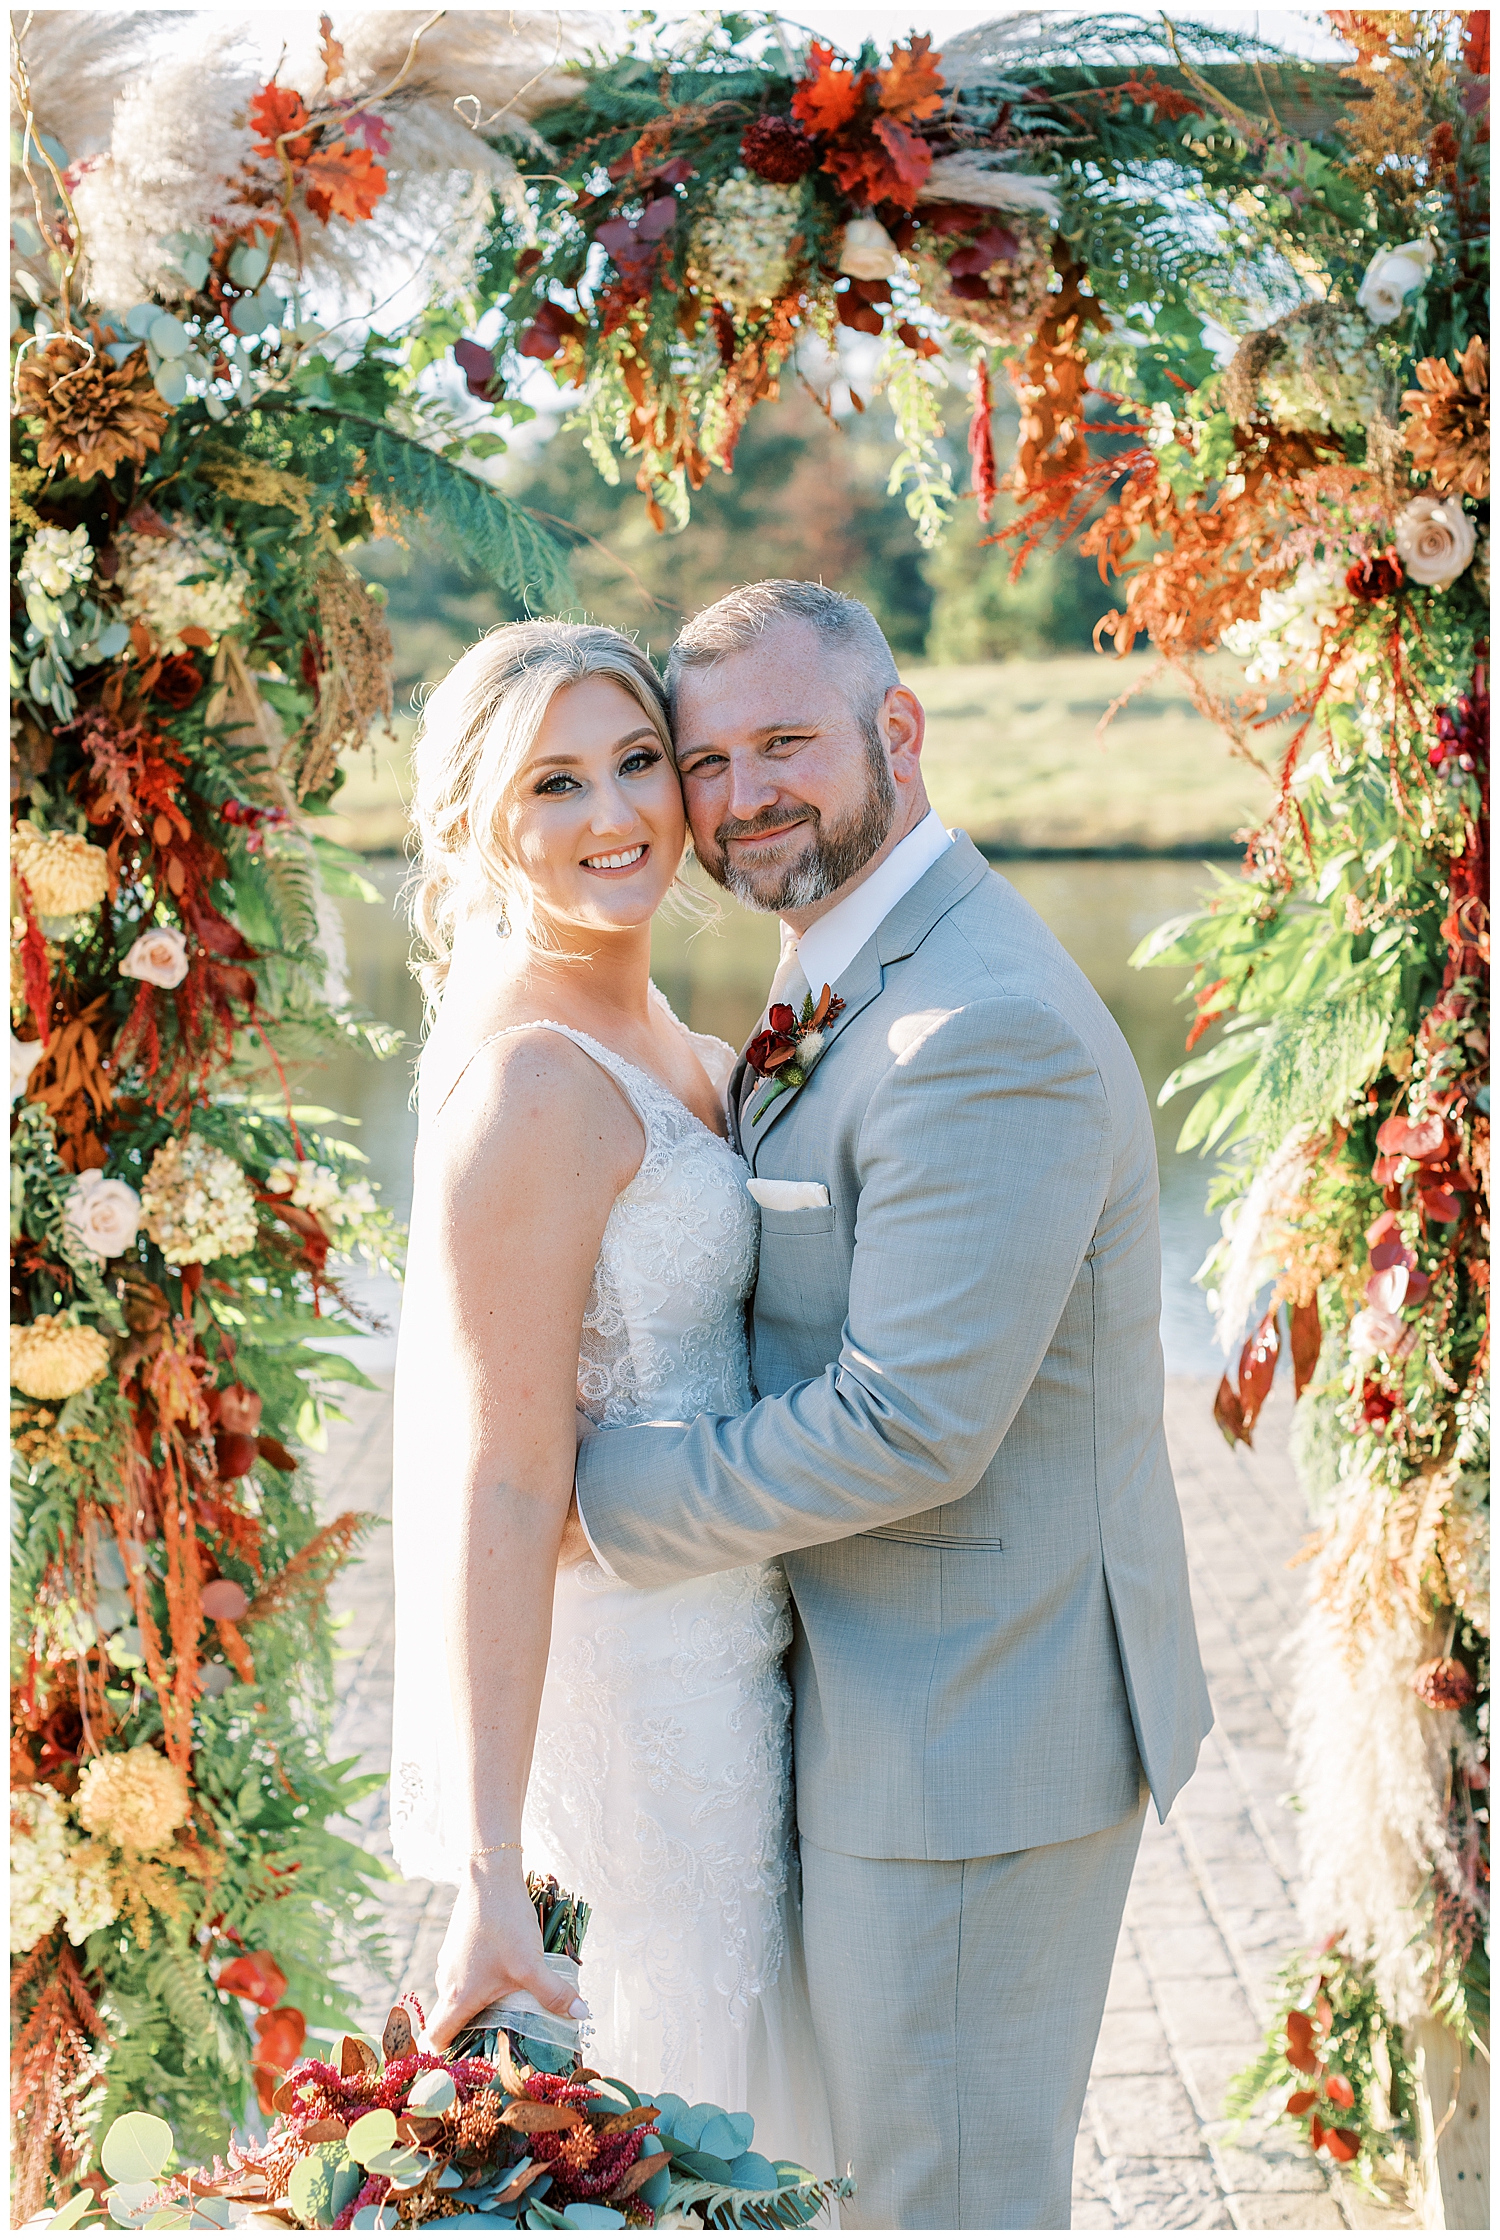 A husband and wife smile in front of a floral arch.